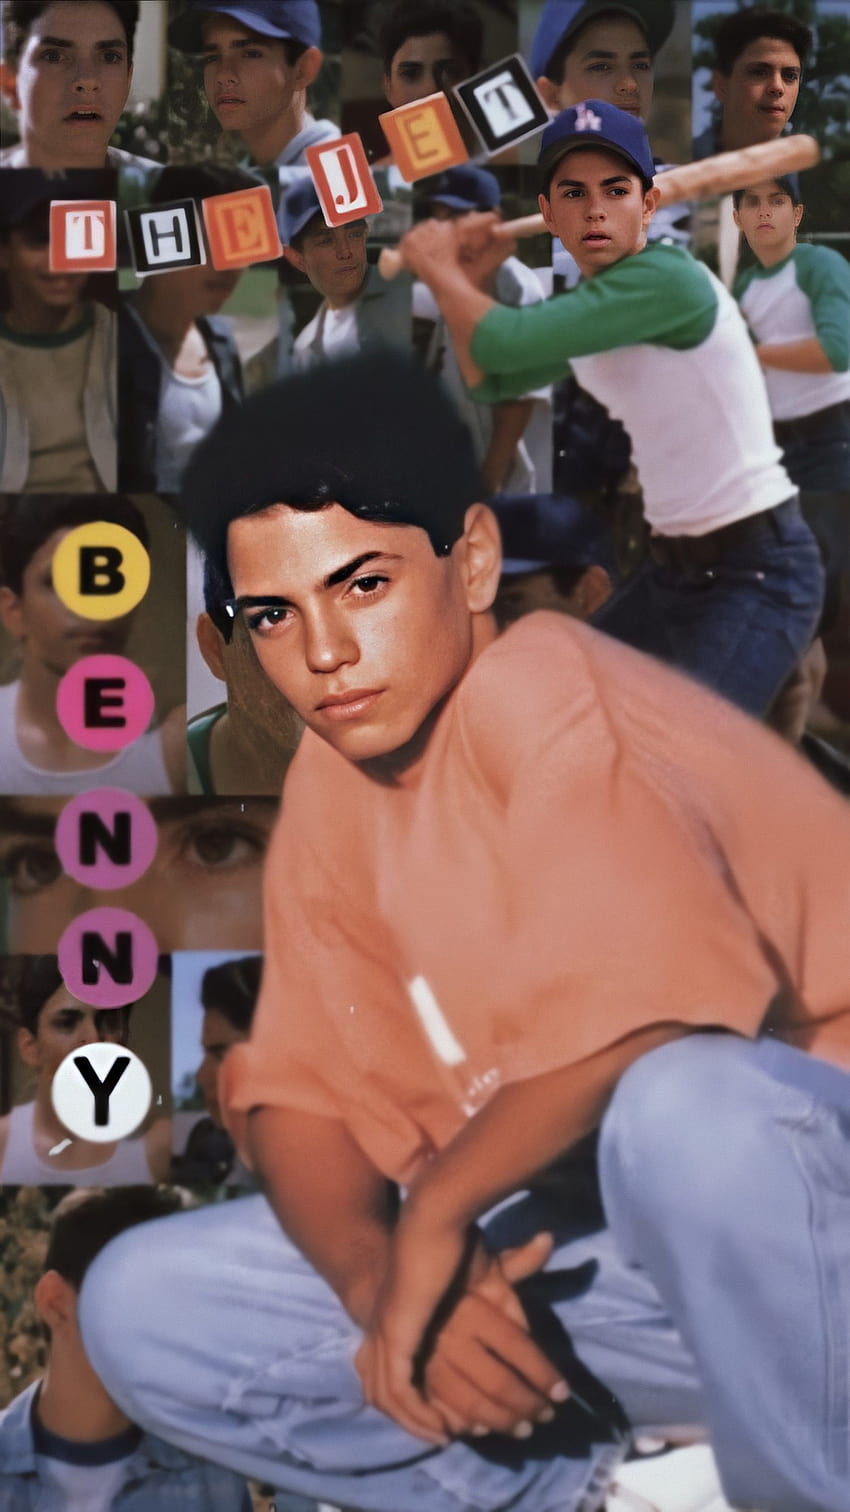 natañol on X: Benny “the jet” Rodriguez & the squad is in da